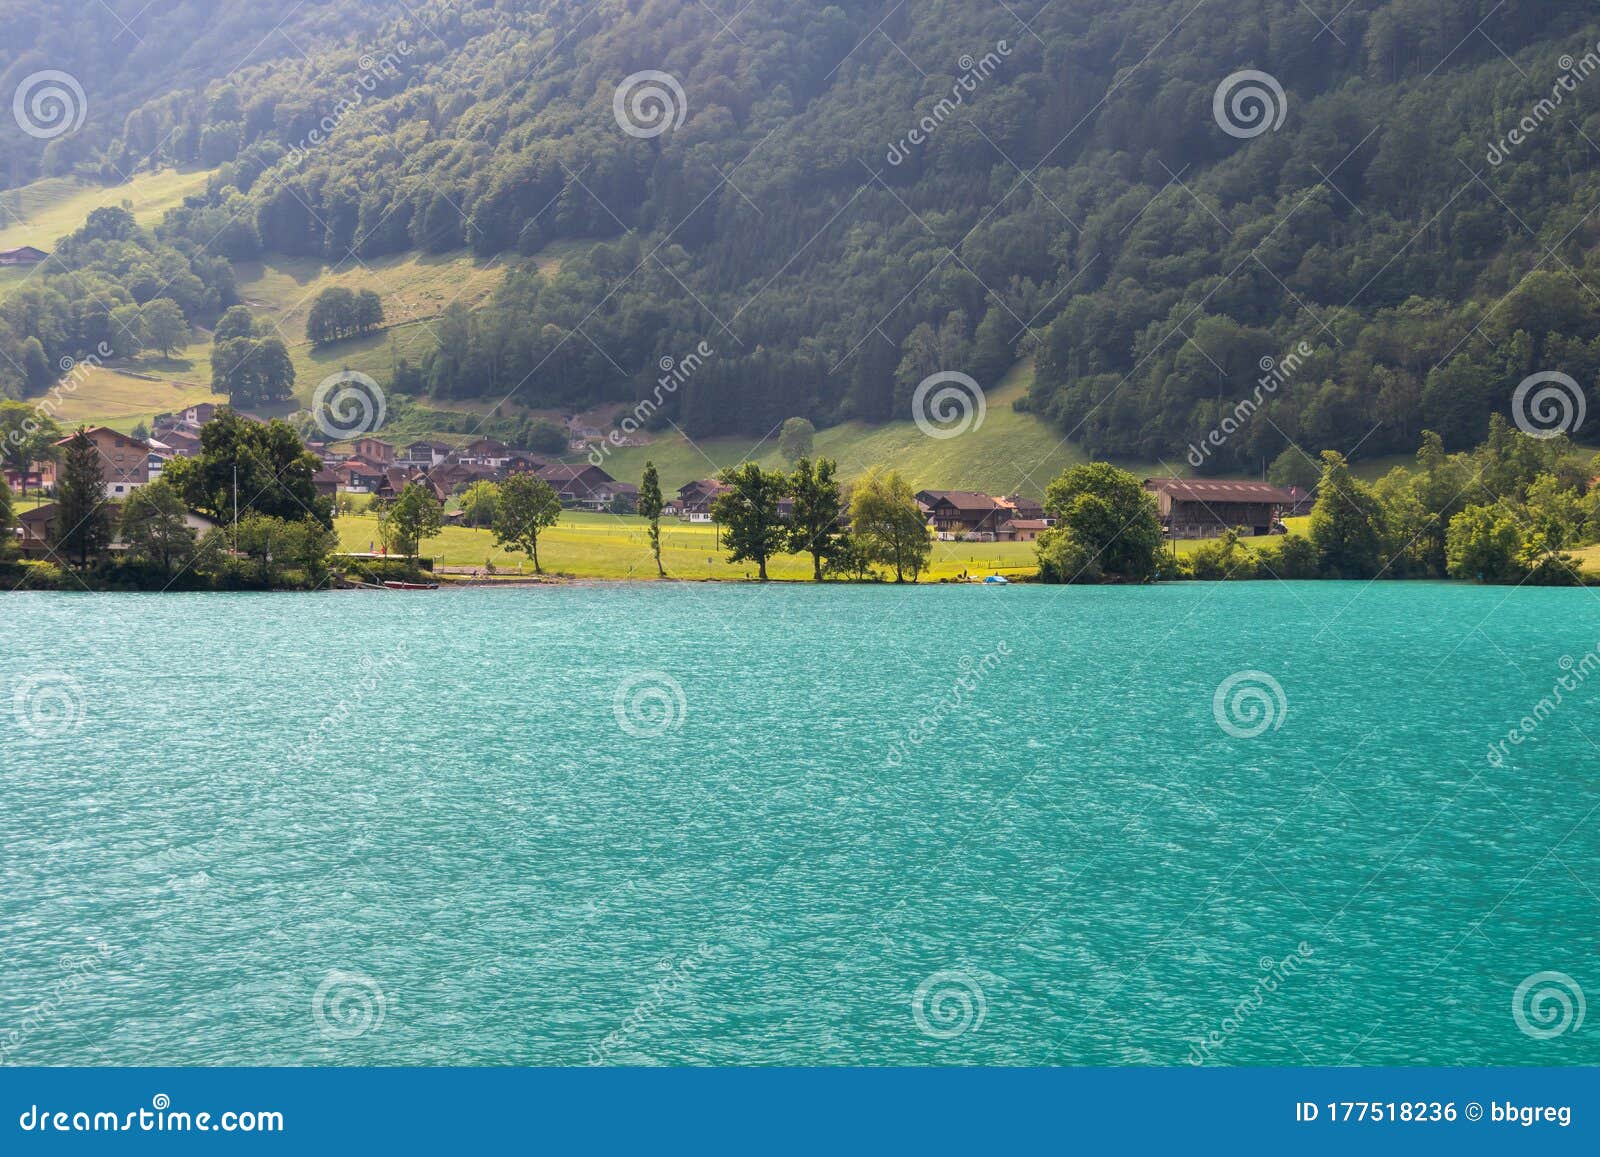 beautiful lake lungern, this lake is popular for its turqouise water